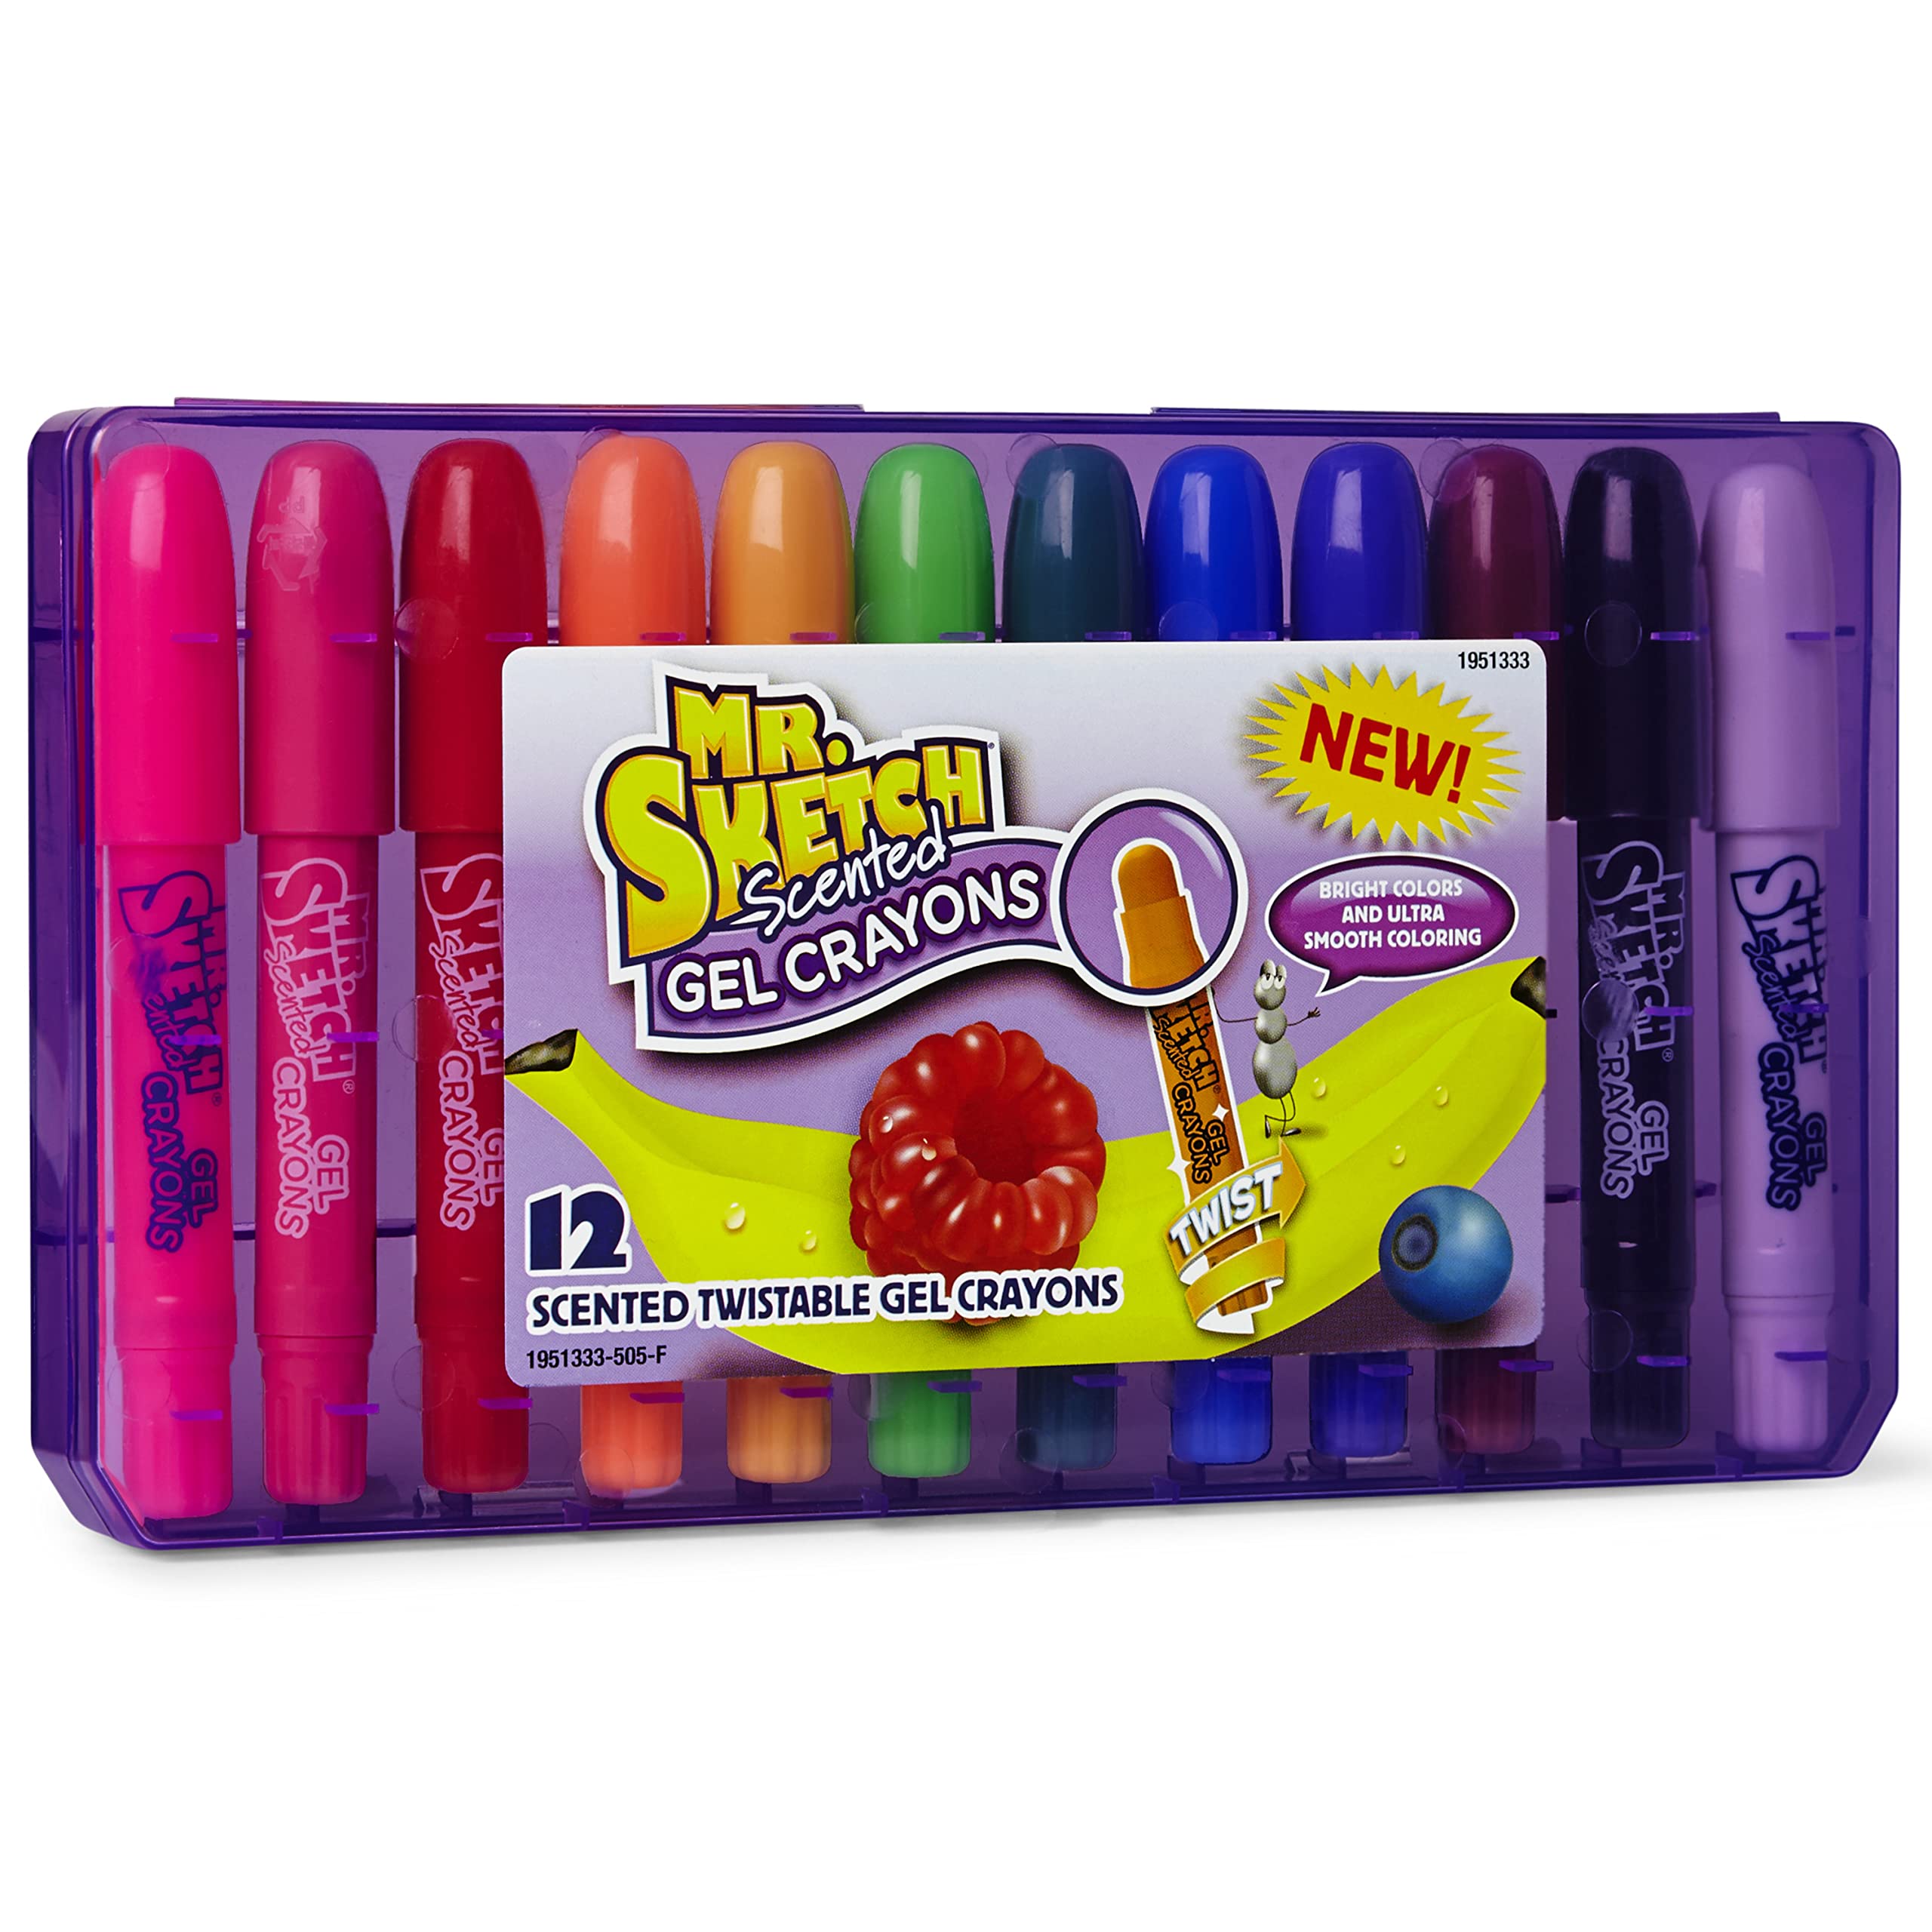 Mr. Sketch Scented Twistable Gel Crayons, Assorted Colors, 12 Count